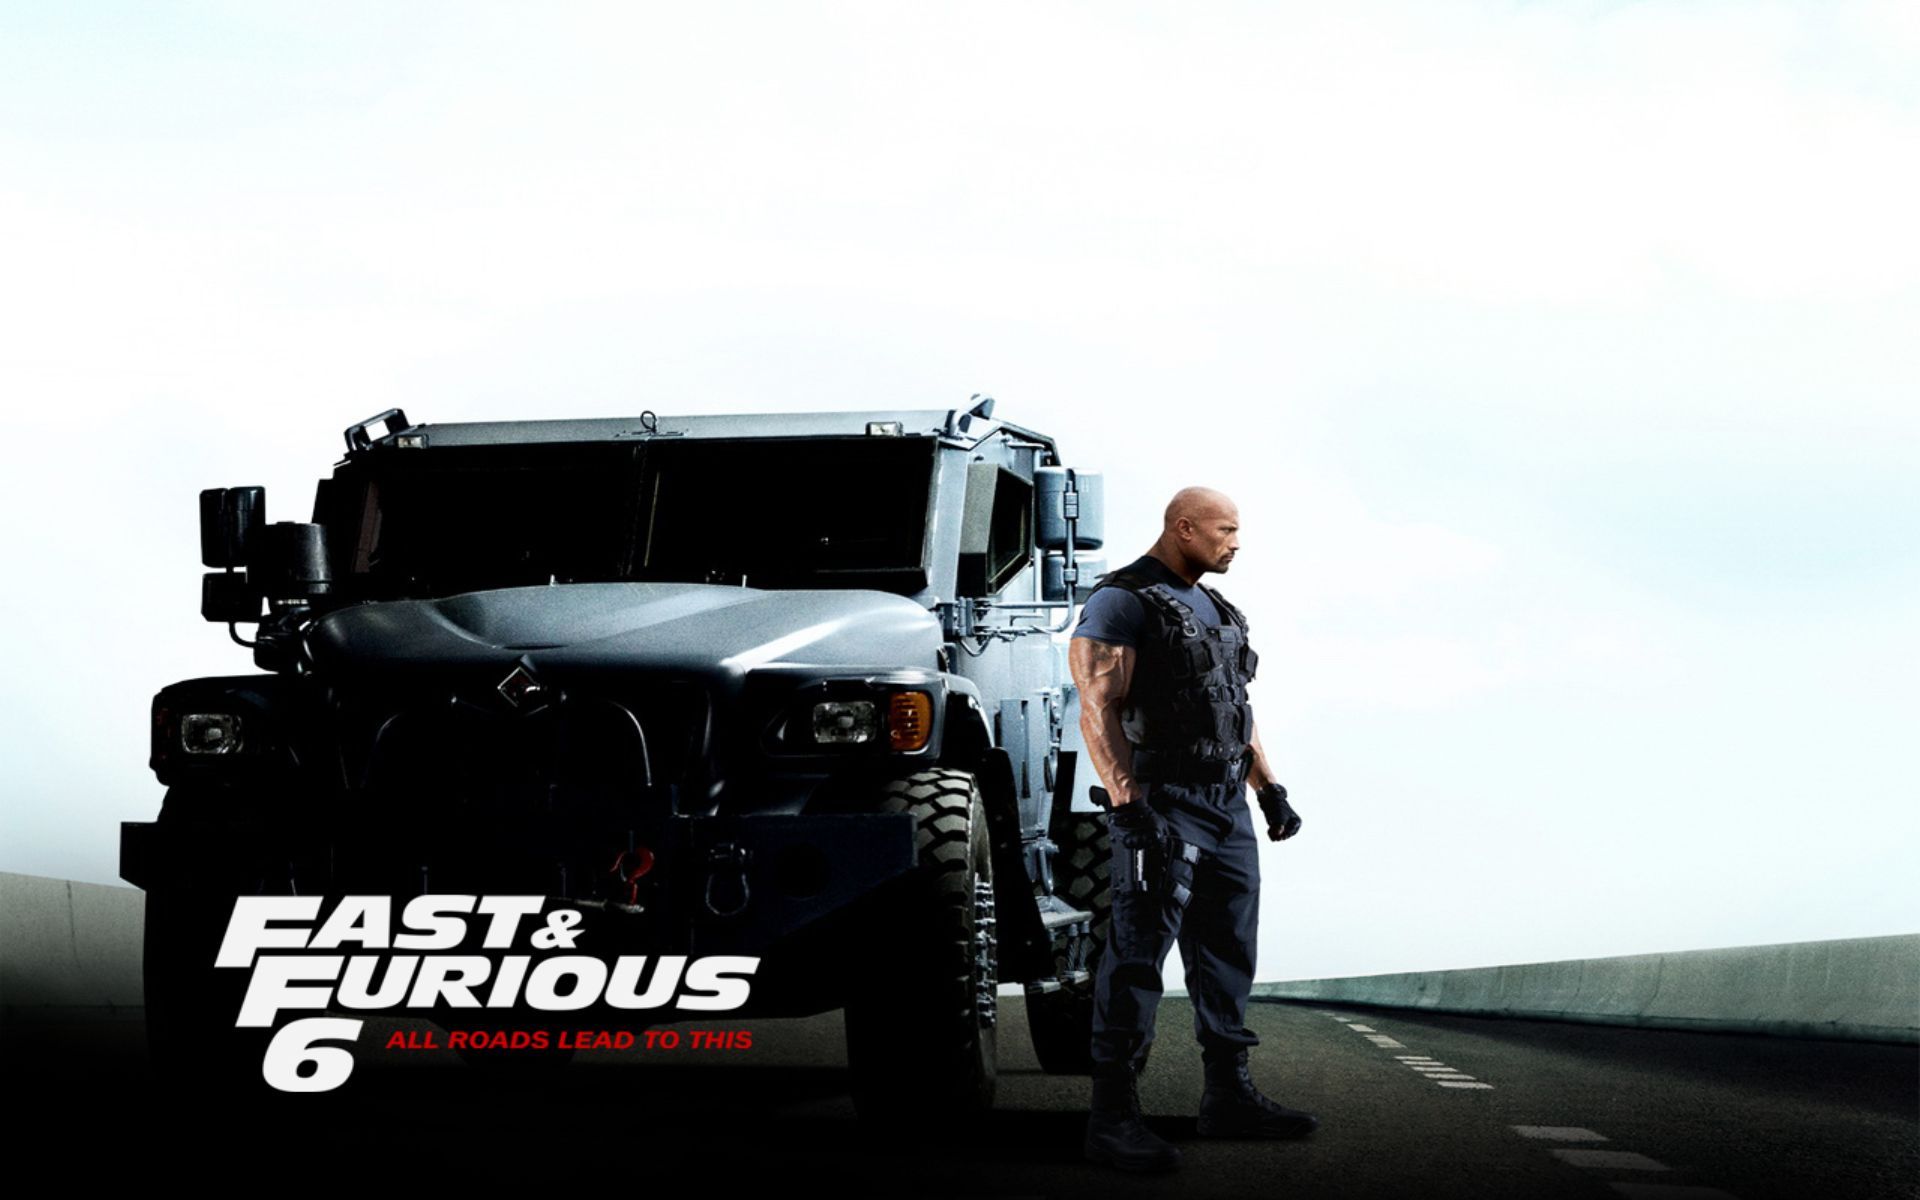 Furious 7 wallpaper in high quality - 1 7 movies